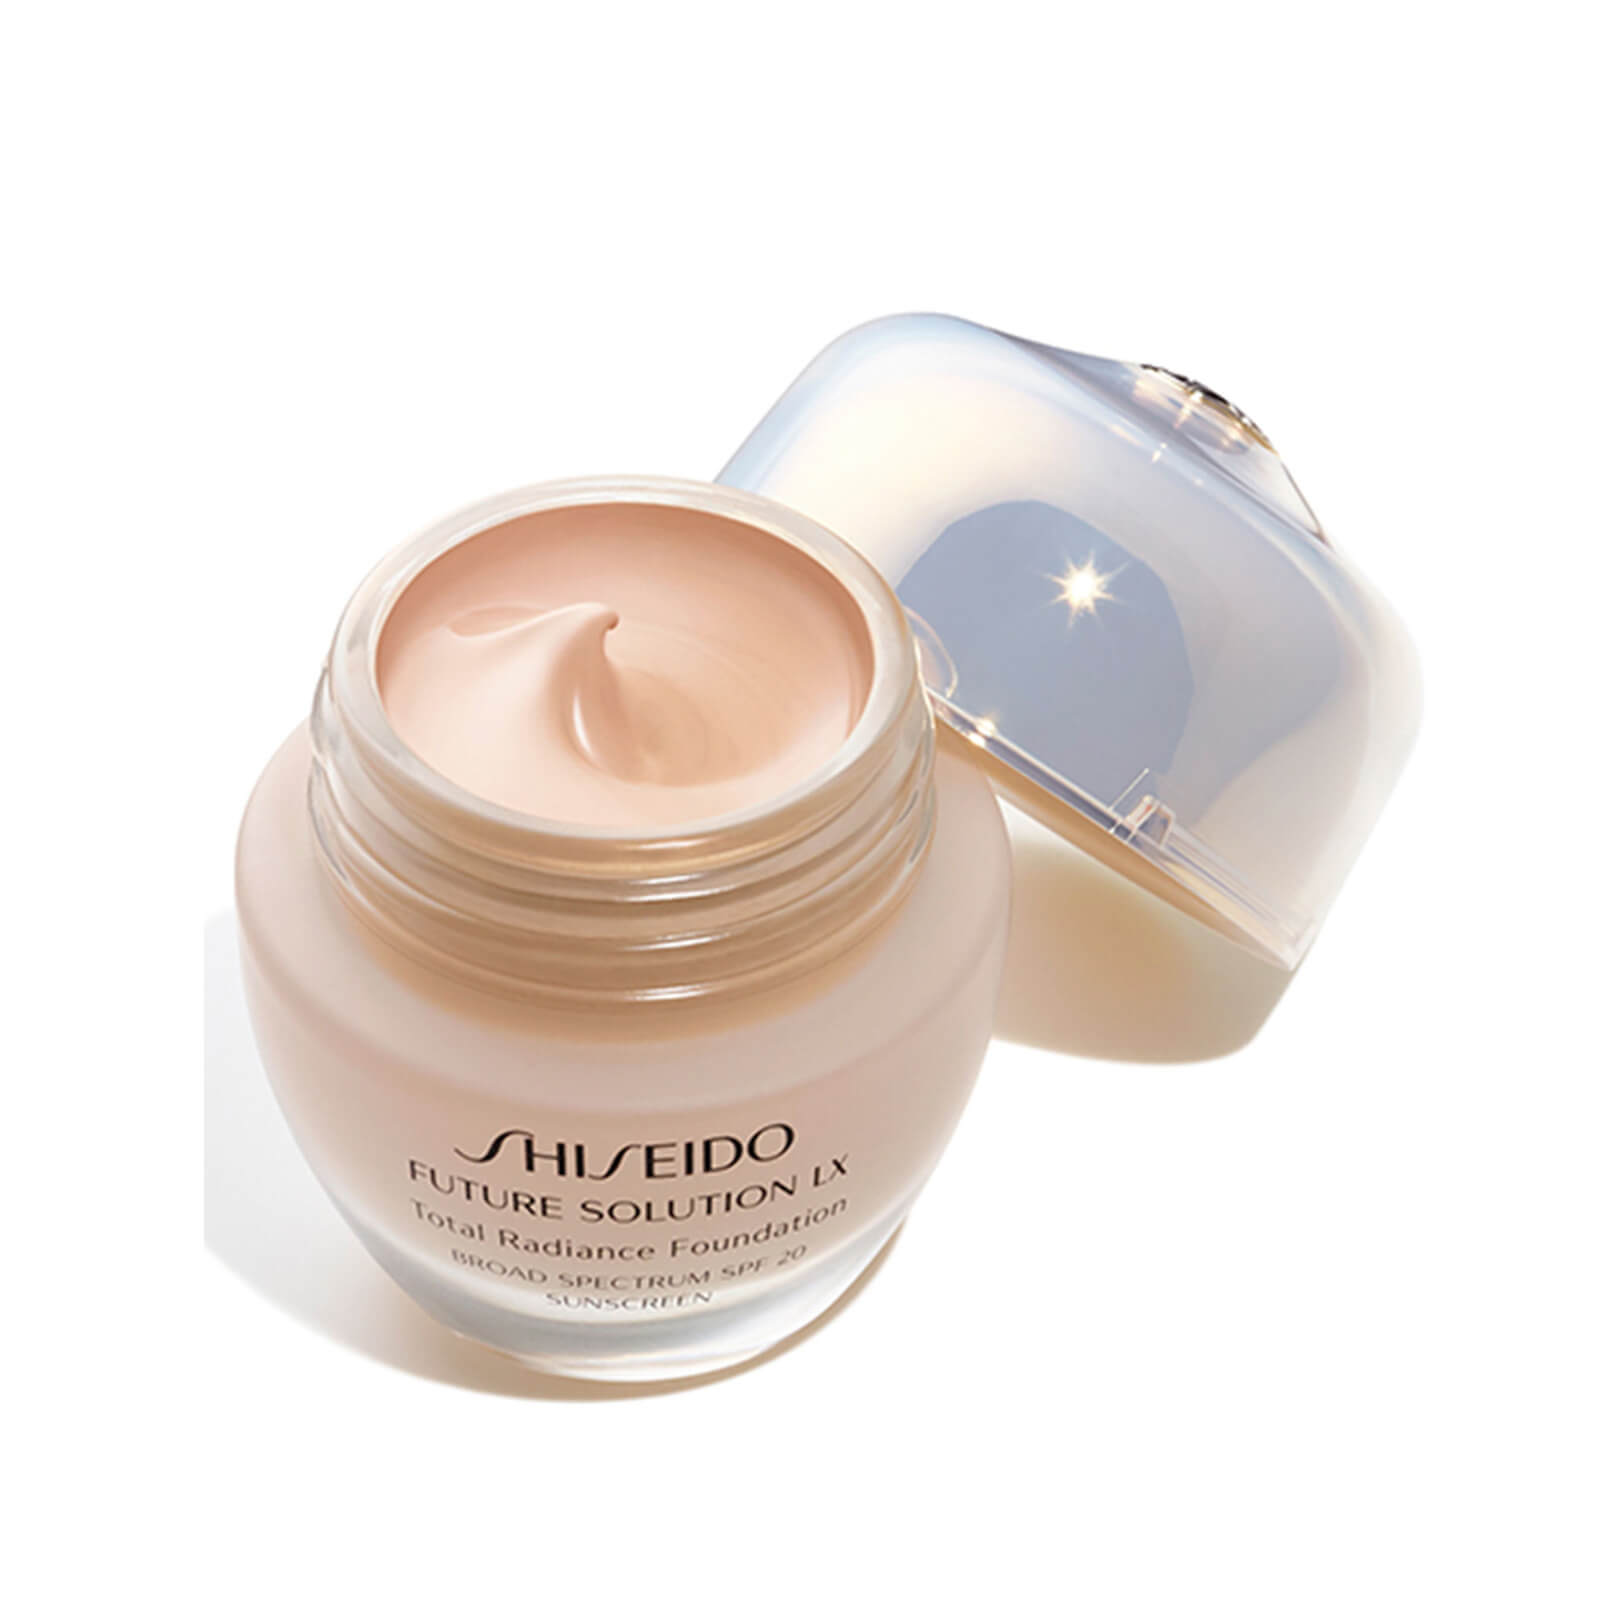 Shiseido Future Solution LX Total Radiance Foundation 30ml (Various Shades) - Rose 4